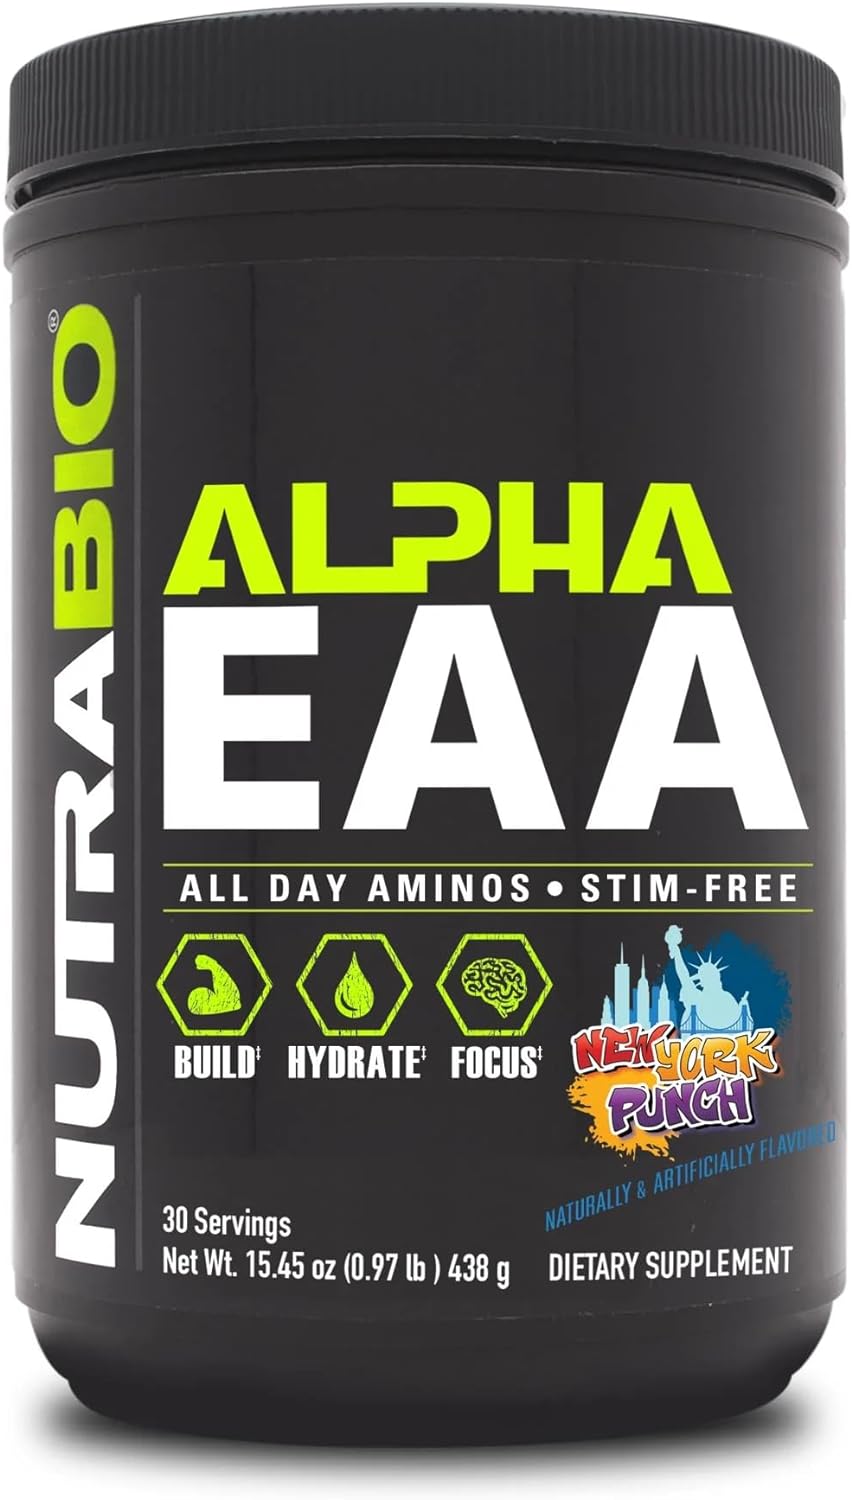 NutraBio Alpha EAA Hydration and Recovery Supplement - Full Spectrum EAA BCAA Matrix with Electrolytes, Nootropics, Coconut Water - Recovery, Energy, Focus, and Hydration Supplement - New York Punch